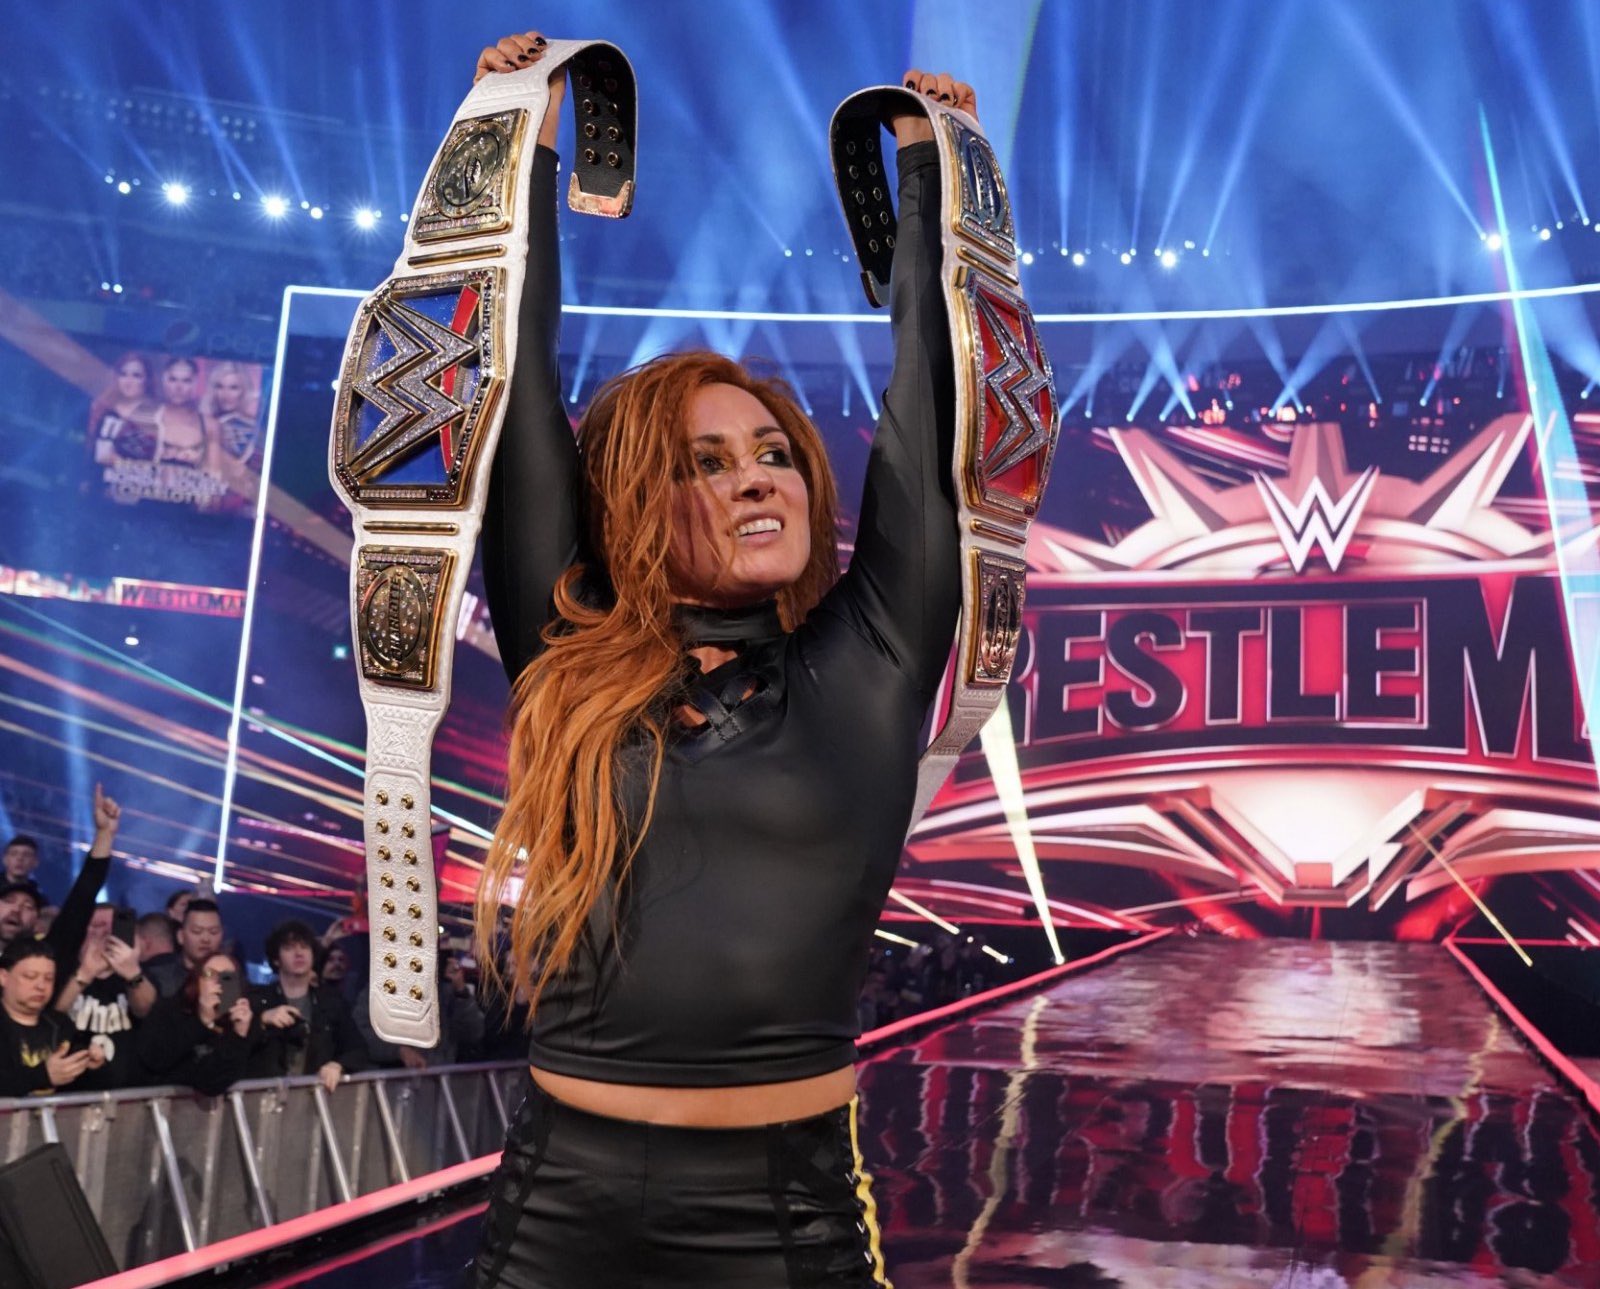 WWE officially confirms Becky Lynch's next opponent for the NXT Women's  Championship